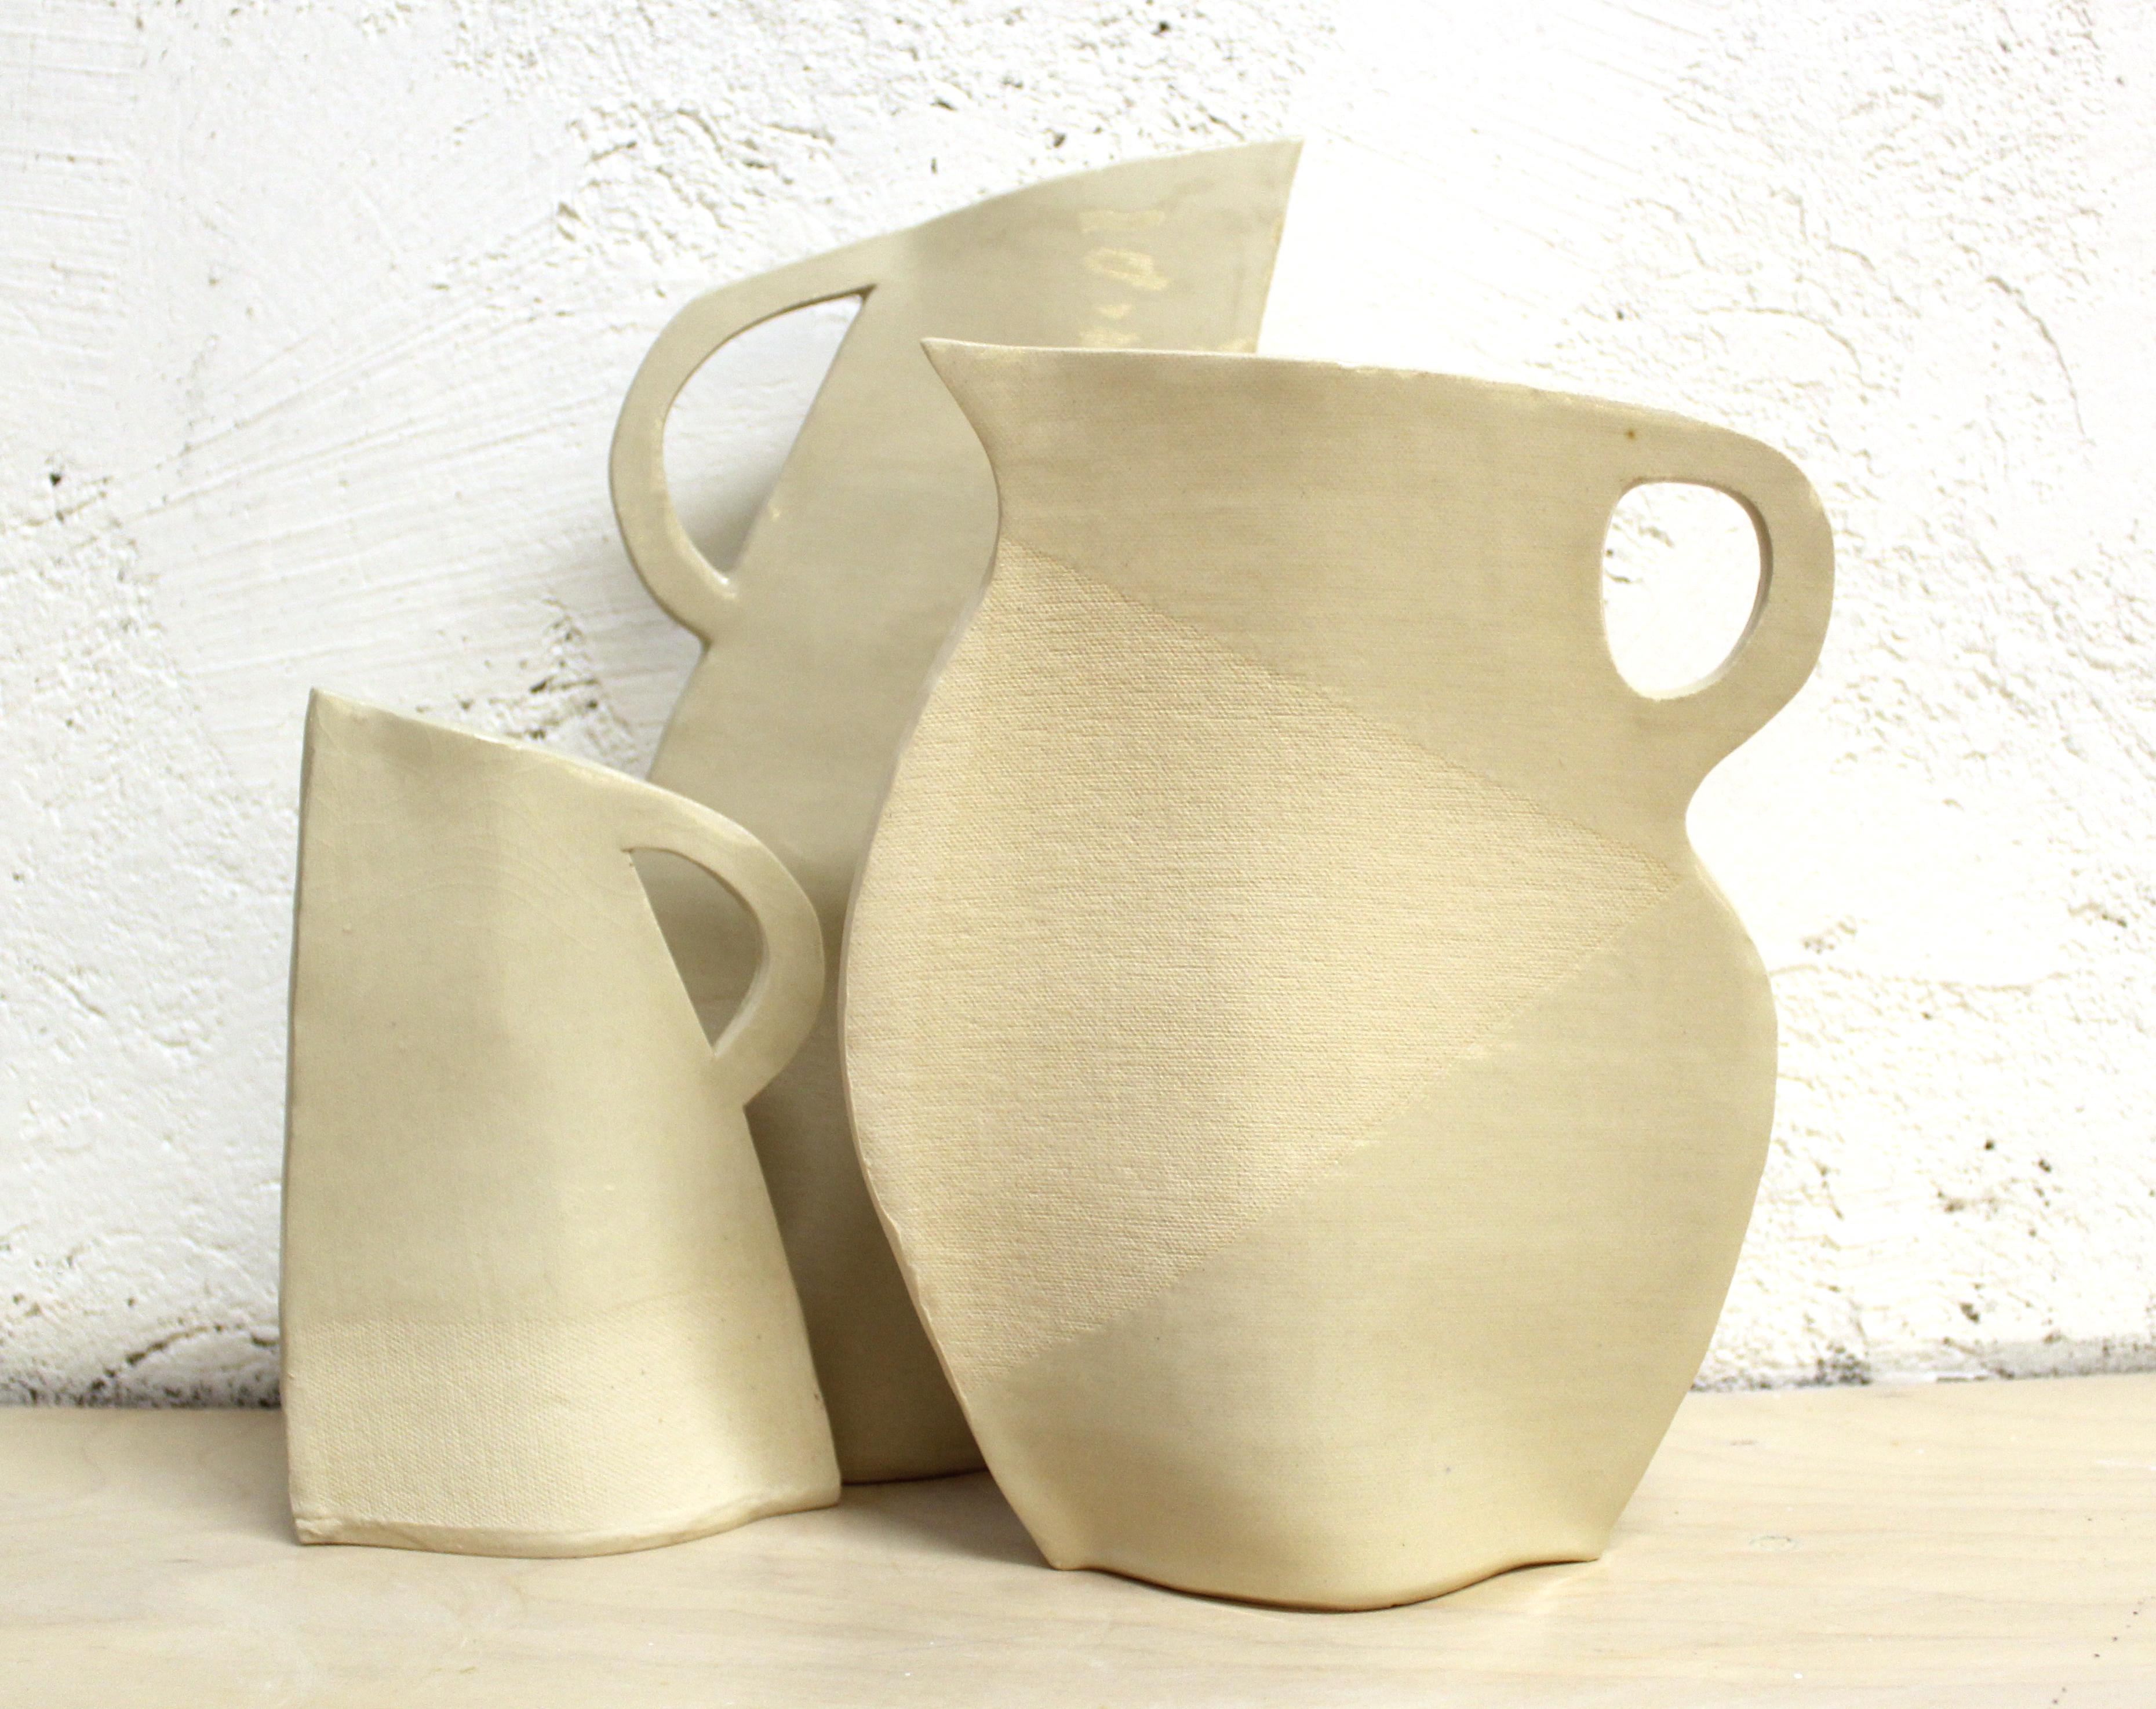 This set of three flat vases by Alison Owen is made through Owen's skillful hand-building technique, utilizing thin slabs of white stoneware clay, partially dipped in clear glaze to create a subtle textural and surface design. The canvas texture of